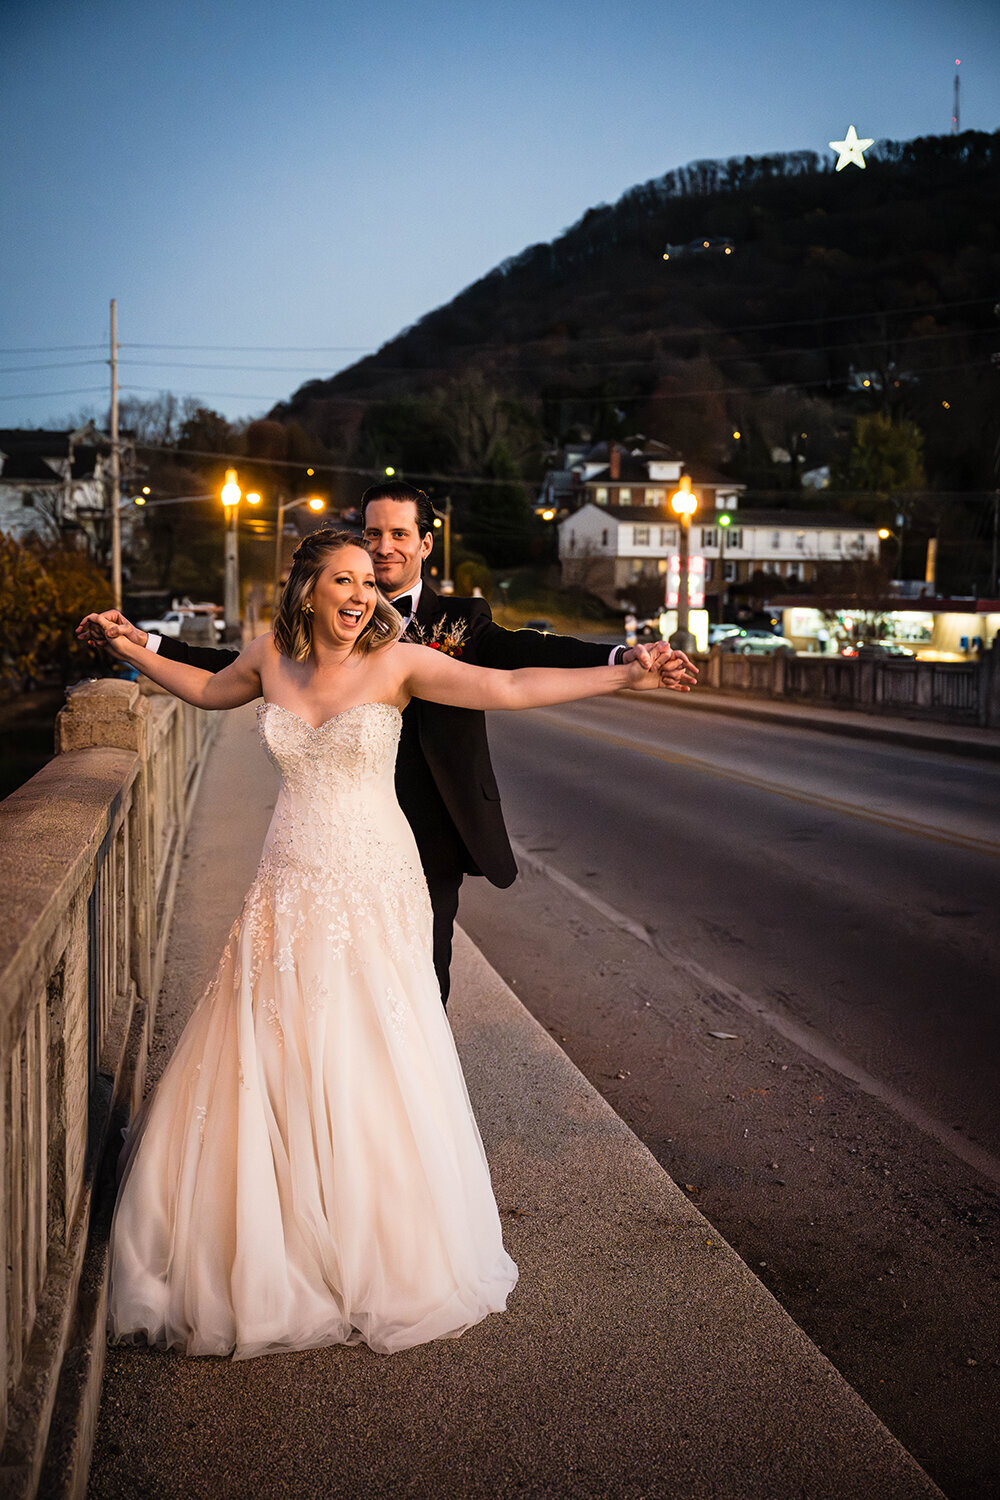 A bride stands in front of a groom while their fingers are intertwined and arms are up in the air moving at the bridge leading up to the Roanoke Star in Virginia. The groom makes a funny face while the bride smiles widely.